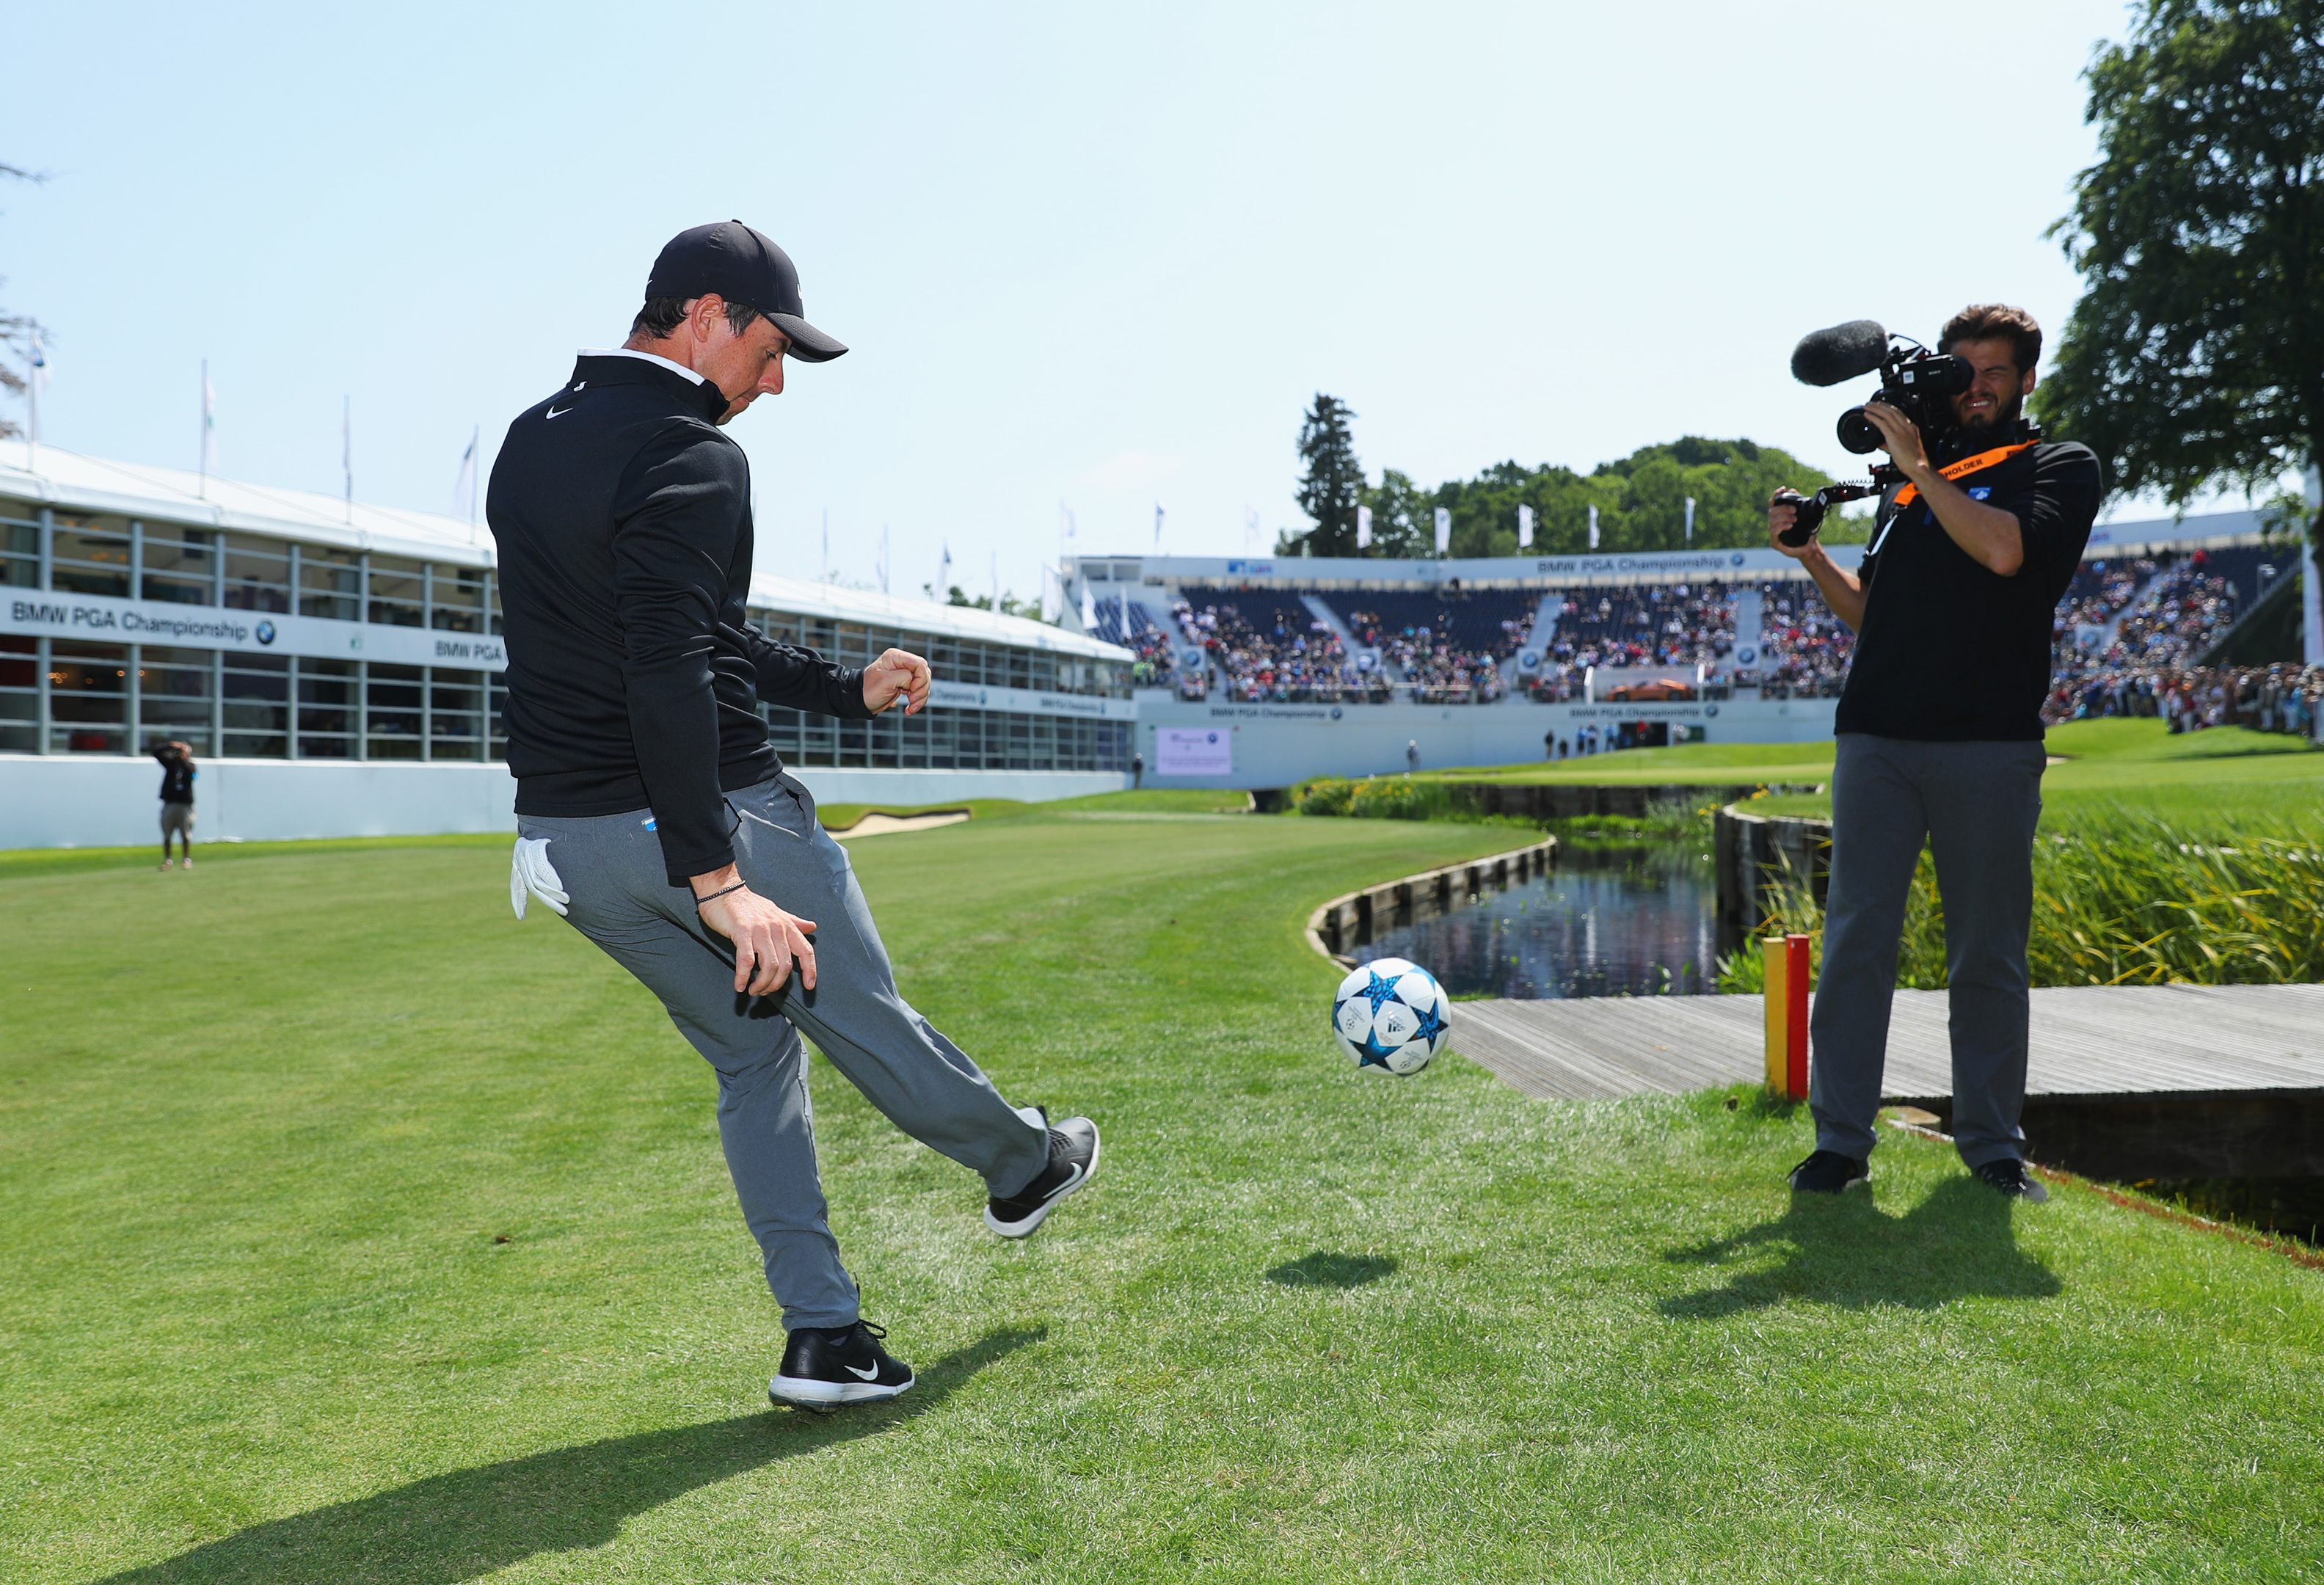 Rory McIlroy takes part in a football golf challenge during the BMW PGA Championship Pro Am yesterday "the first time I've kicked a ball since (my five a sides injury) in 2015" he joked.